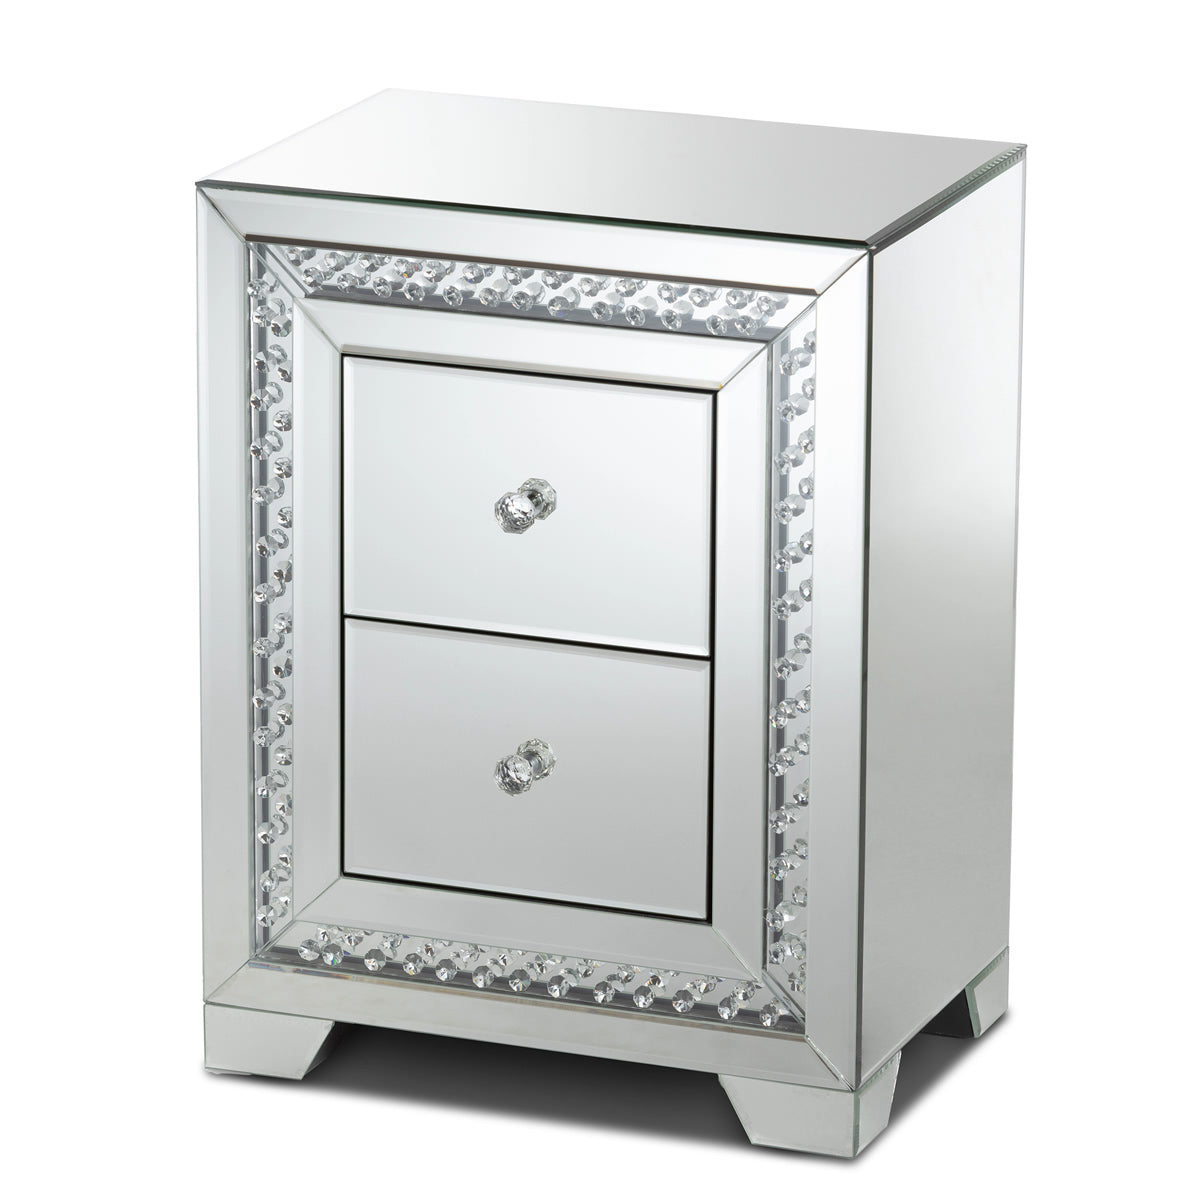 Baxton Studio Mina Modern and Contemporary Hollywood Regency Glamour Style Mirrored Three Drawer Nightstand Bedside Table Baxton Studio-nightstands-Minimal And Modern - 1